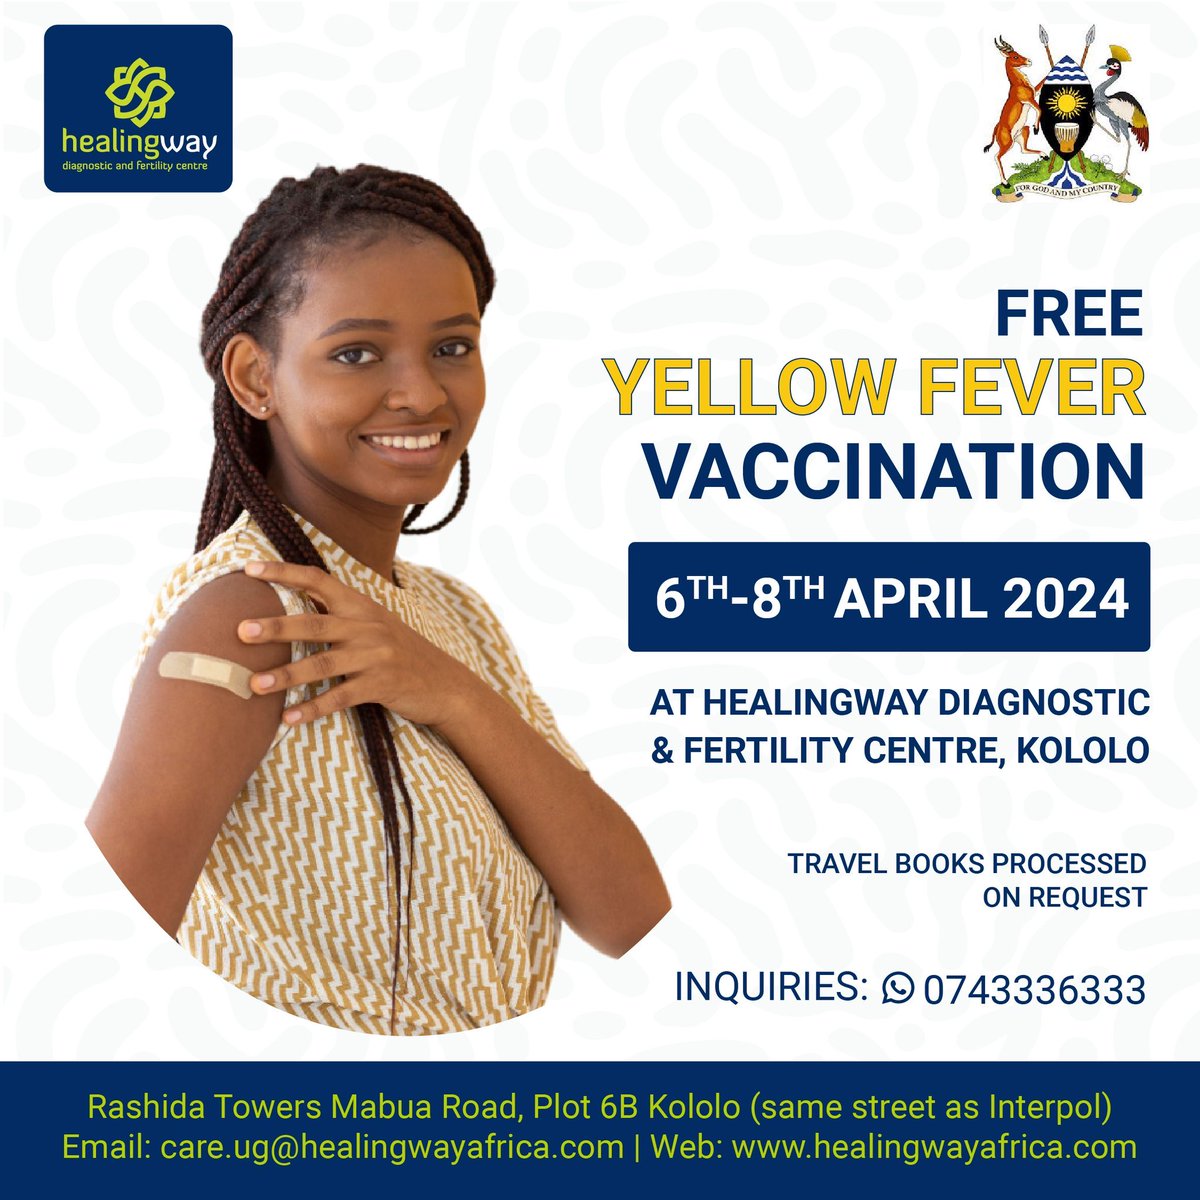 Free Yellow fever vaccination happening right now at Healingway, located at Rashida Towers, Mabua road - Kololo

Come through right now. Your health is your wealth.